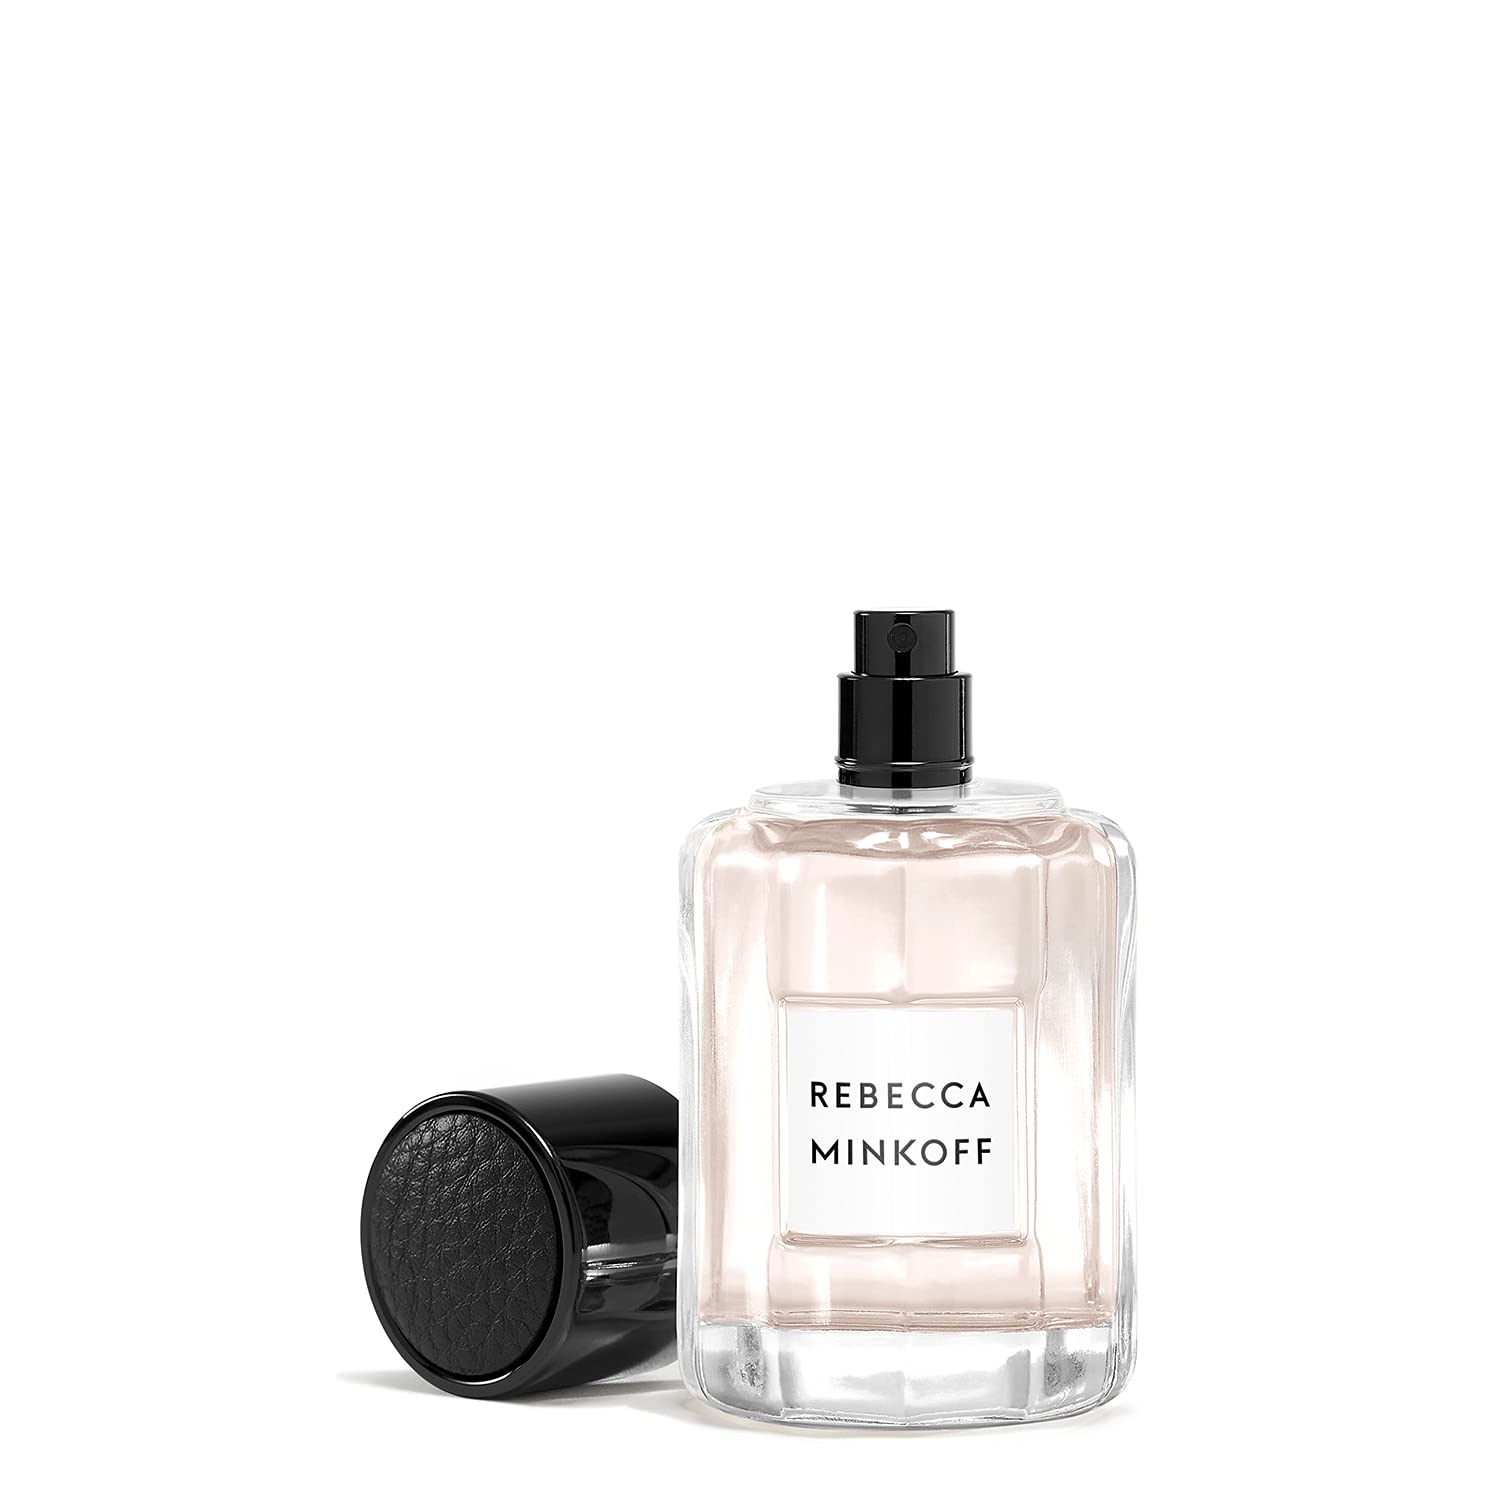 Rebecca Minkoff Eau De Parfum Feminine Accents of Jasmine and Coriander, Radiate Sensuality & Warmth With A Magnetic Aura, Gluten, Cruelty and Phosphate Free, Vegan, Gift Set, 3 Count